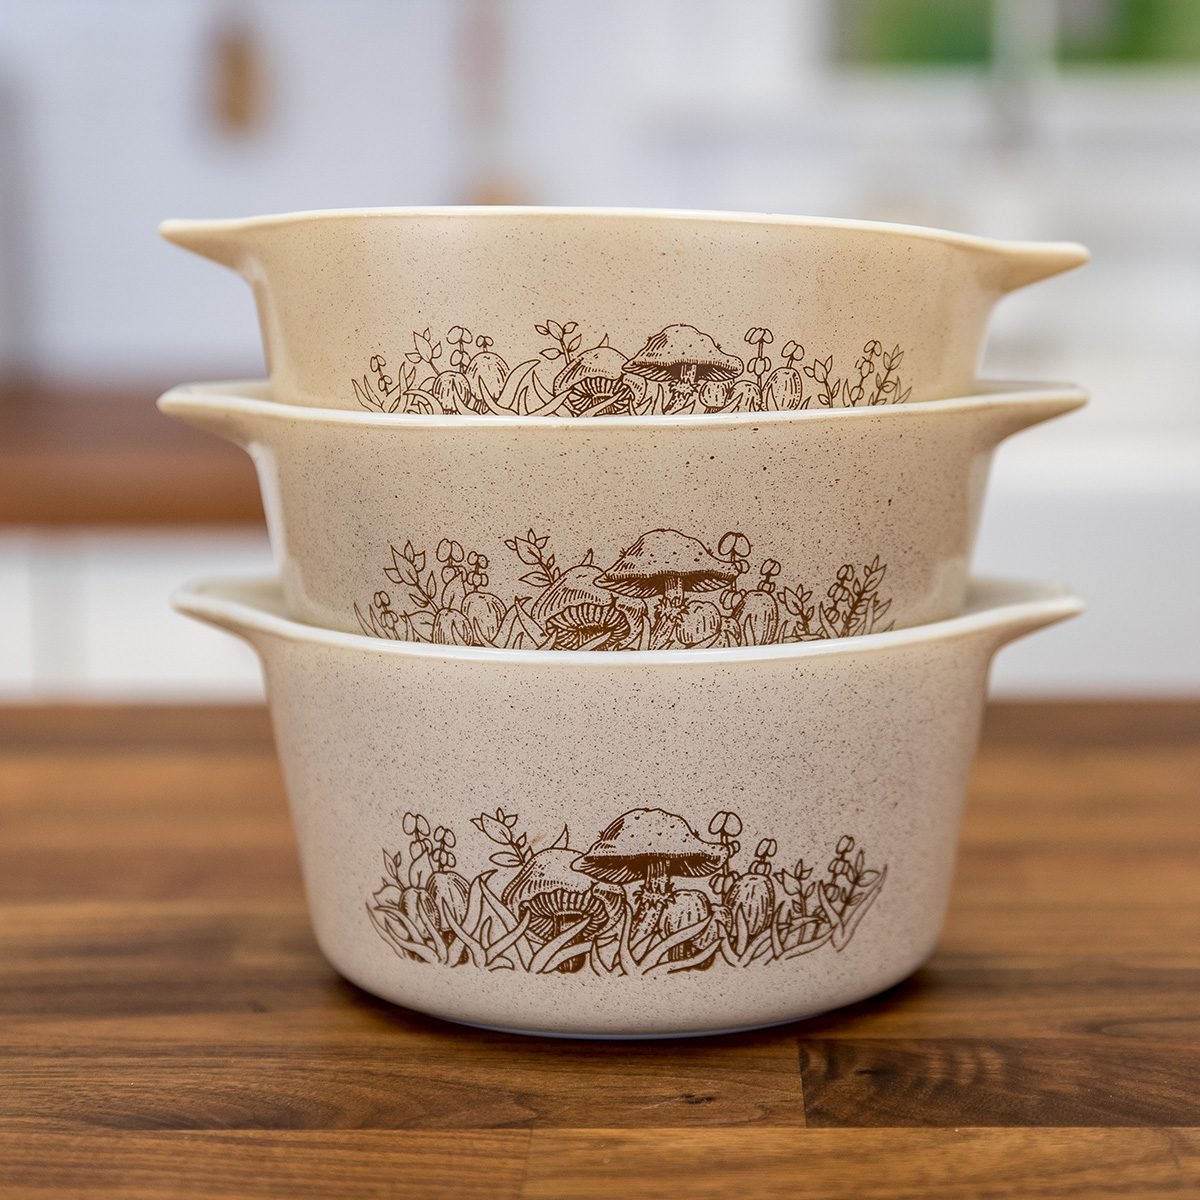 Download The Vintage Pyrex Patterns You Remember from Grandma's House